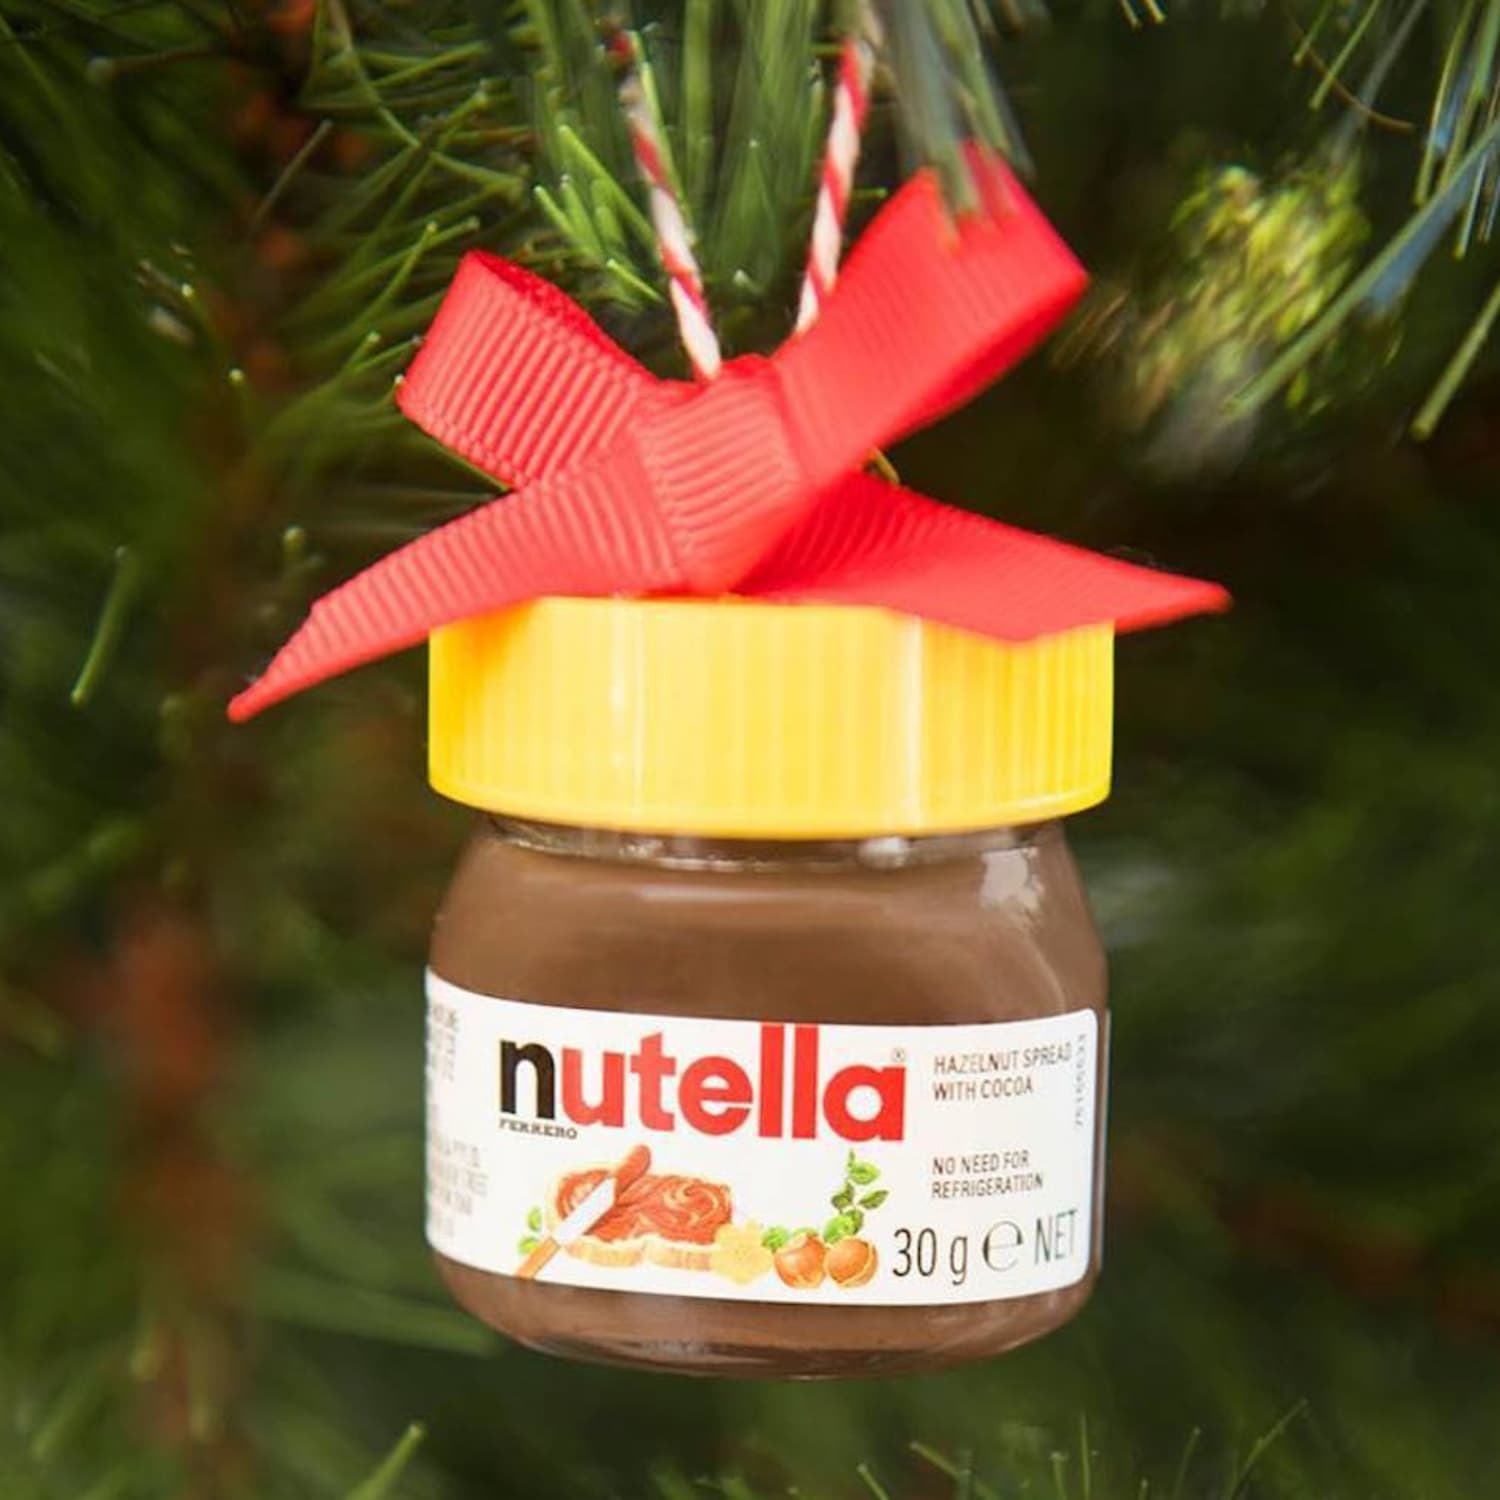 You Need These Tiny Nutella Jars in Your Life